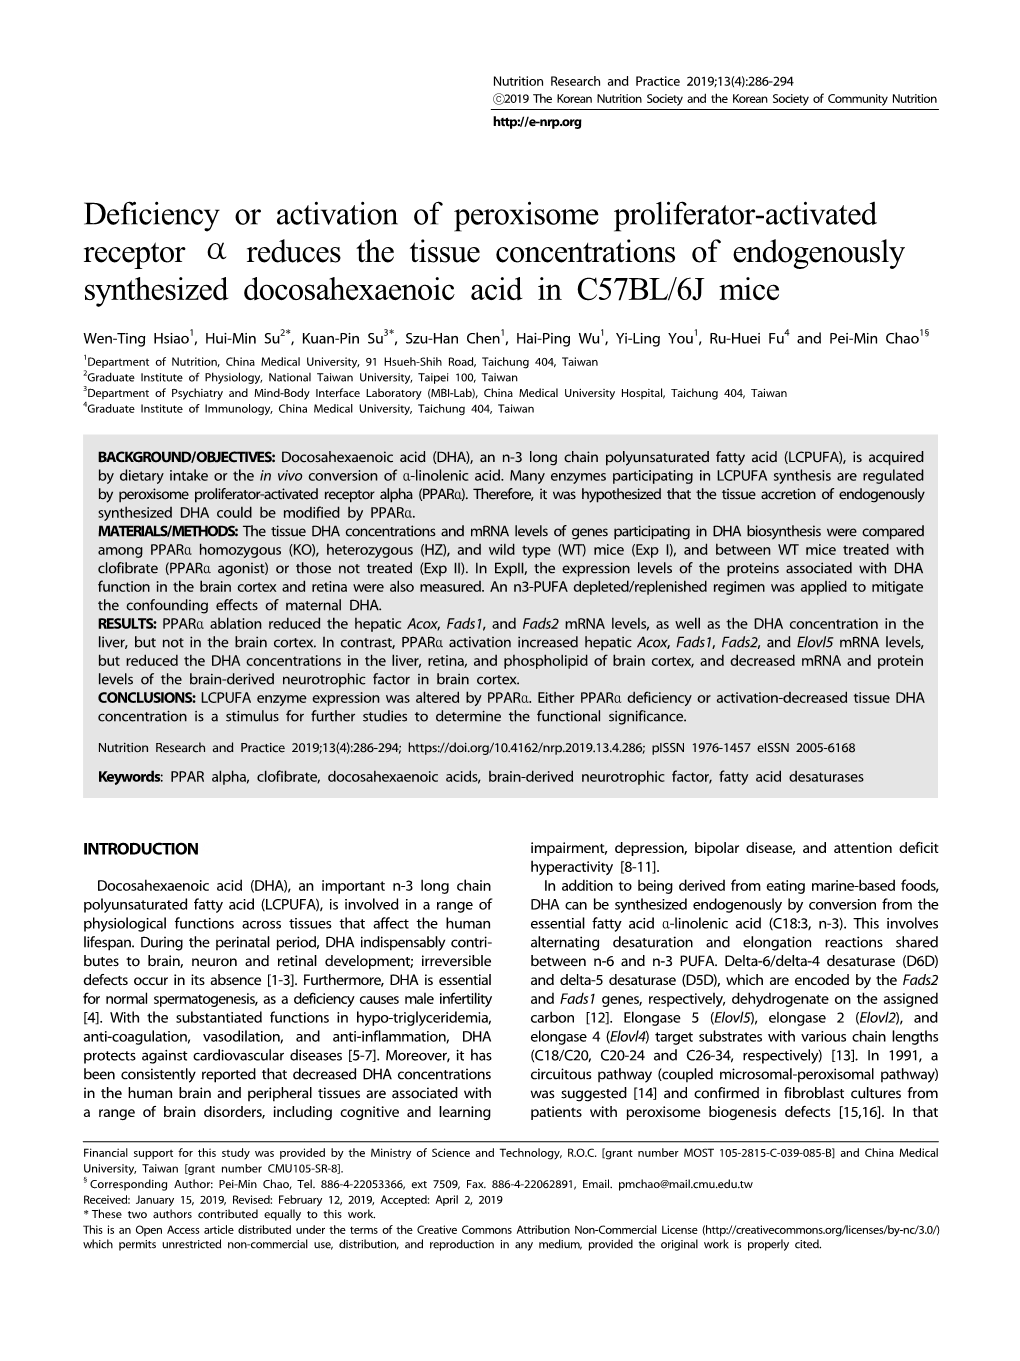 Deficiency Or Activation of Peroxisome Proliferator-Activated Receptor